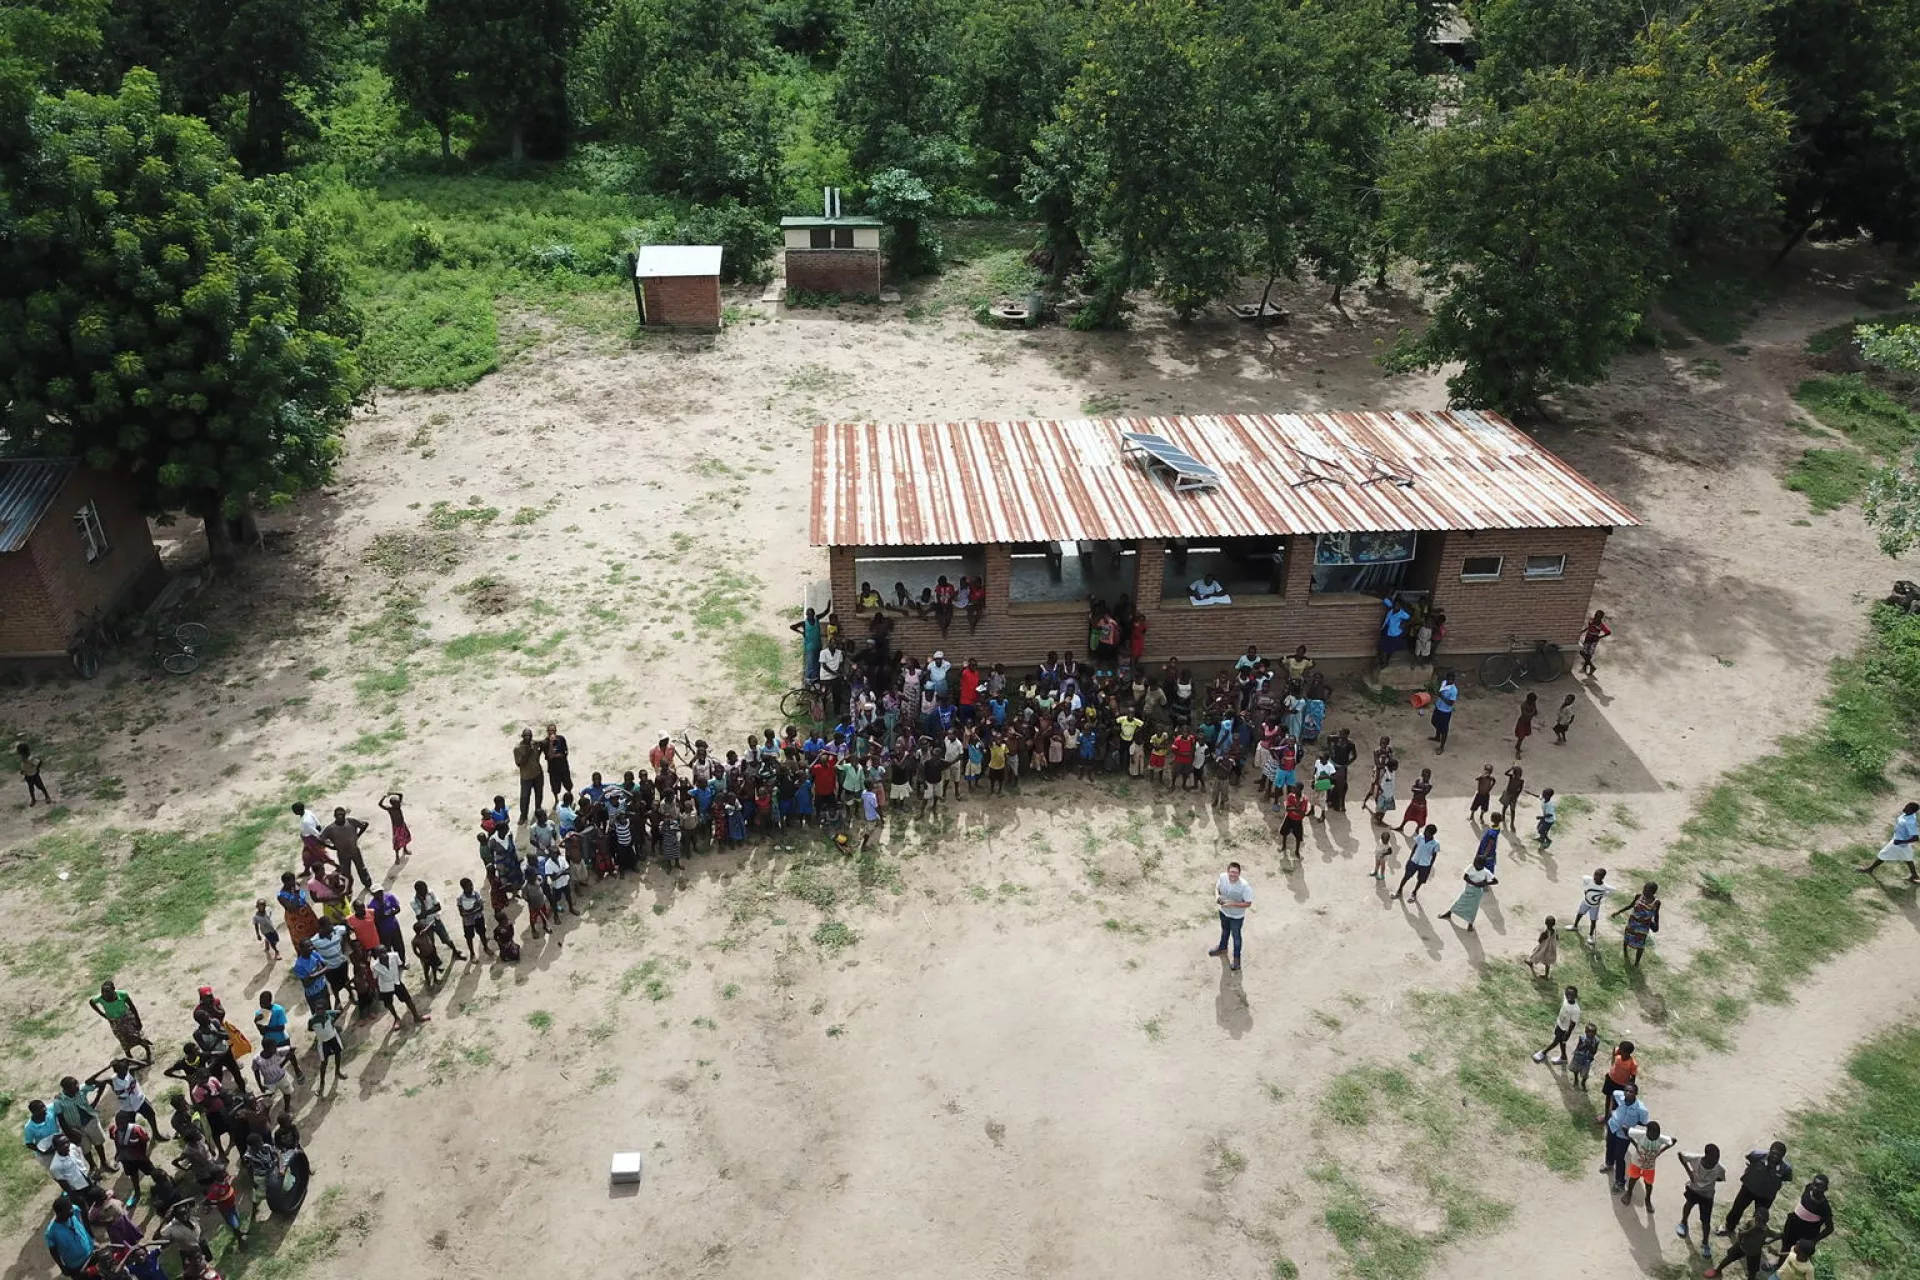 After the mapping mission, UNICEF’s drone coordinator Tautvydas Juskauskas takes off the drone for the last time to make a drone selfie with the community members.